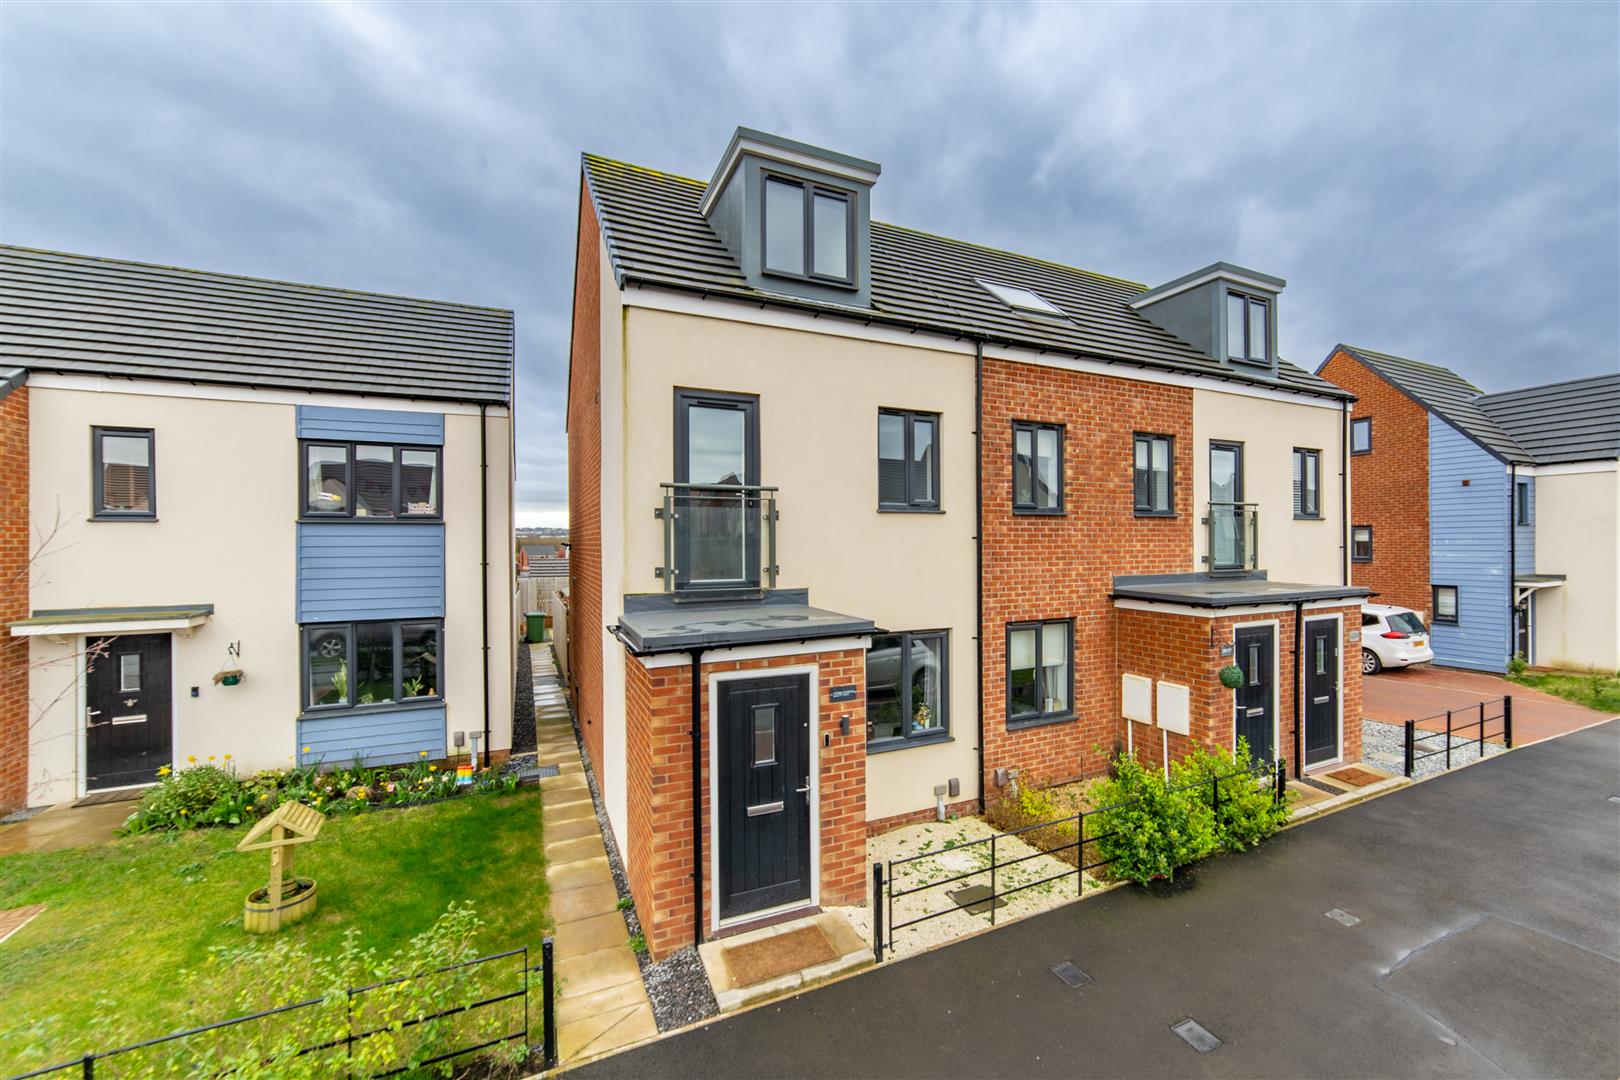 3 bed end of terrace house for sale in Roseden Way, Newcastle Upon Tyne, NE13